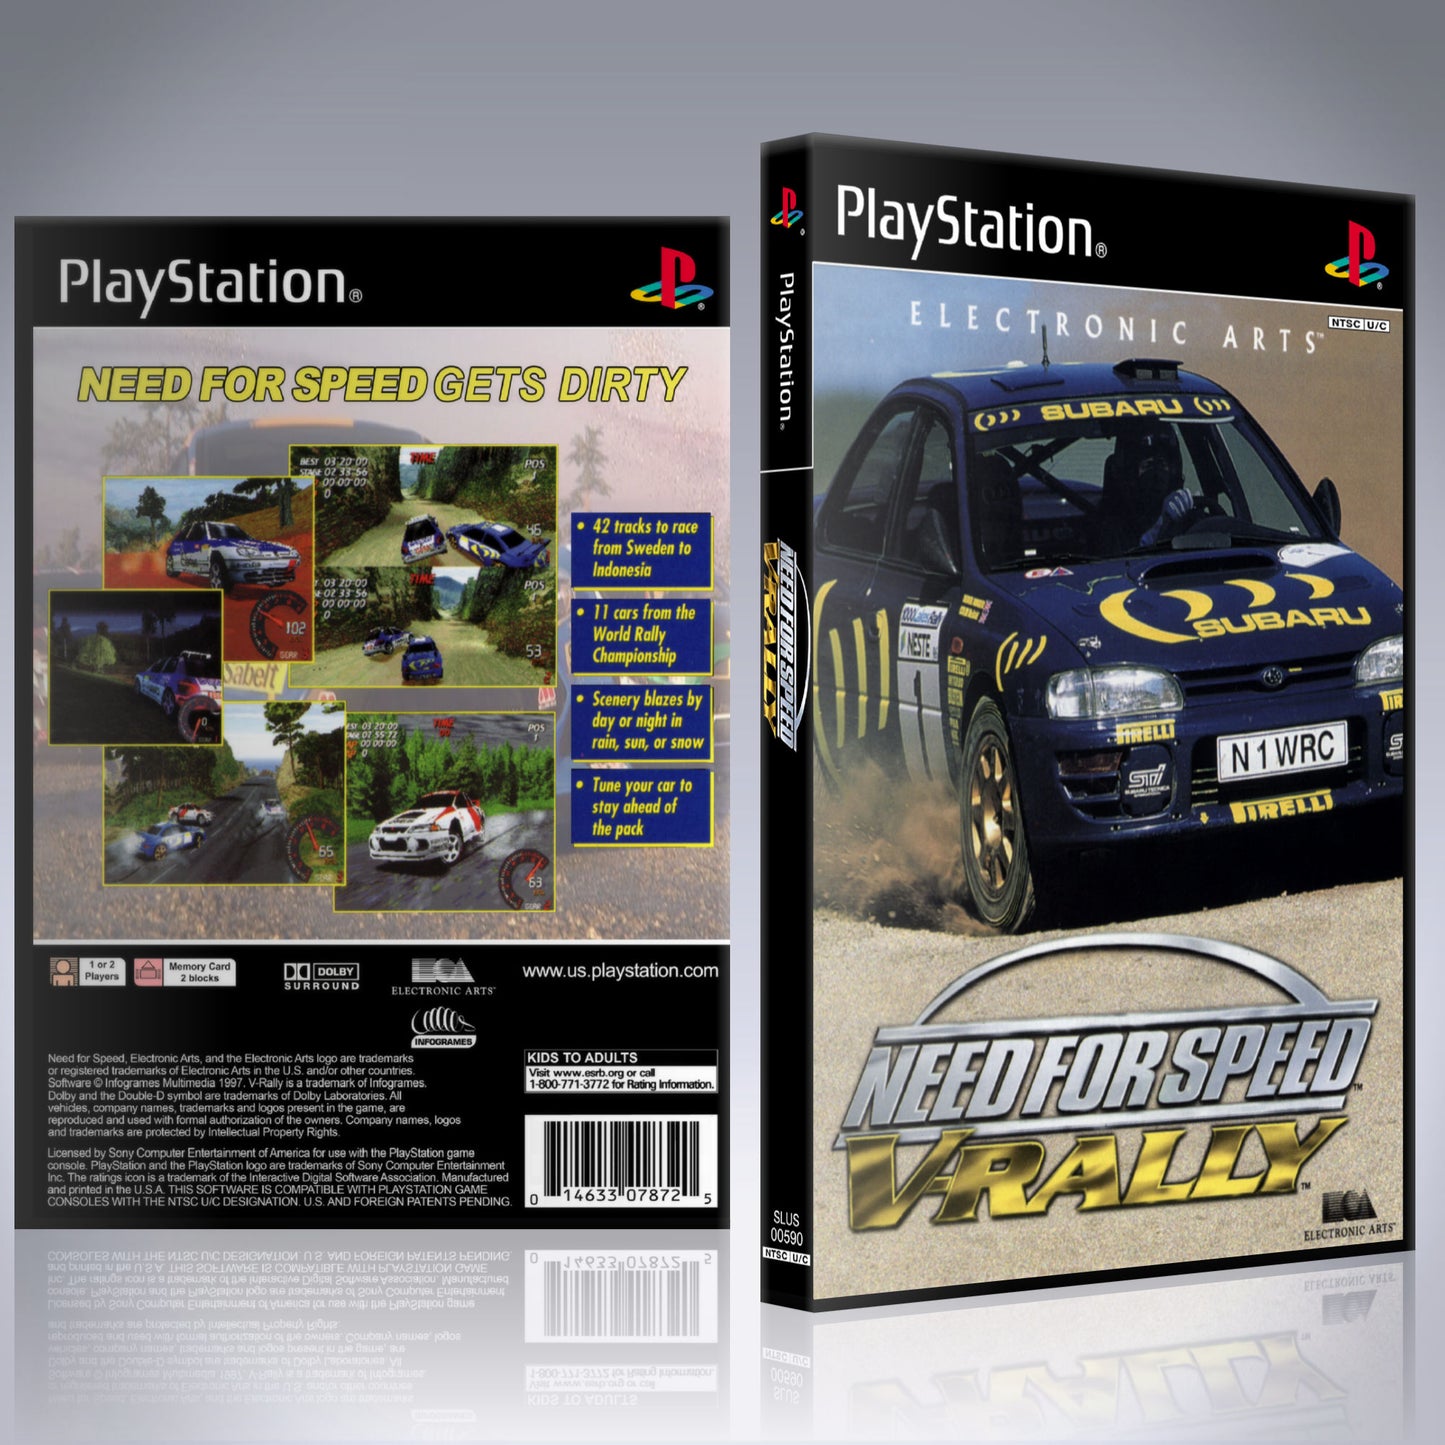 PS1 Case - NO GAME - Need for Speed - V-Rally